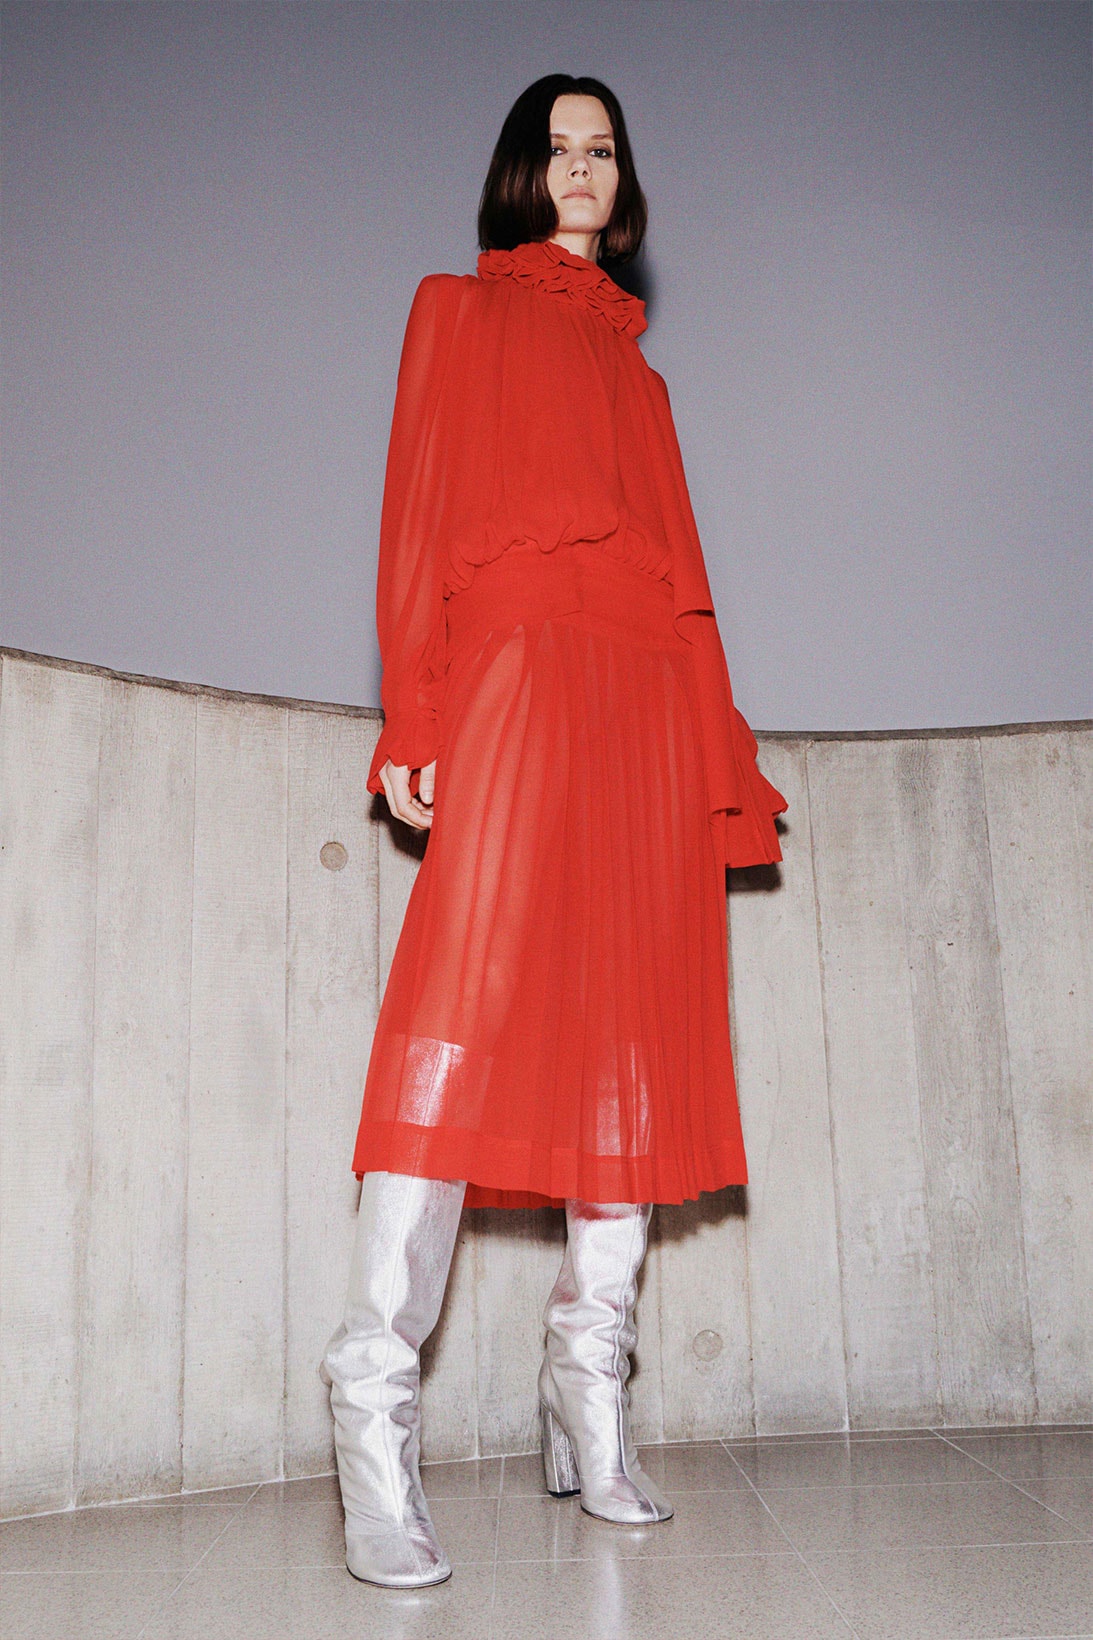 victoria beckham fall winter 2021 fw21 collection red pleated dress skirt silver boots